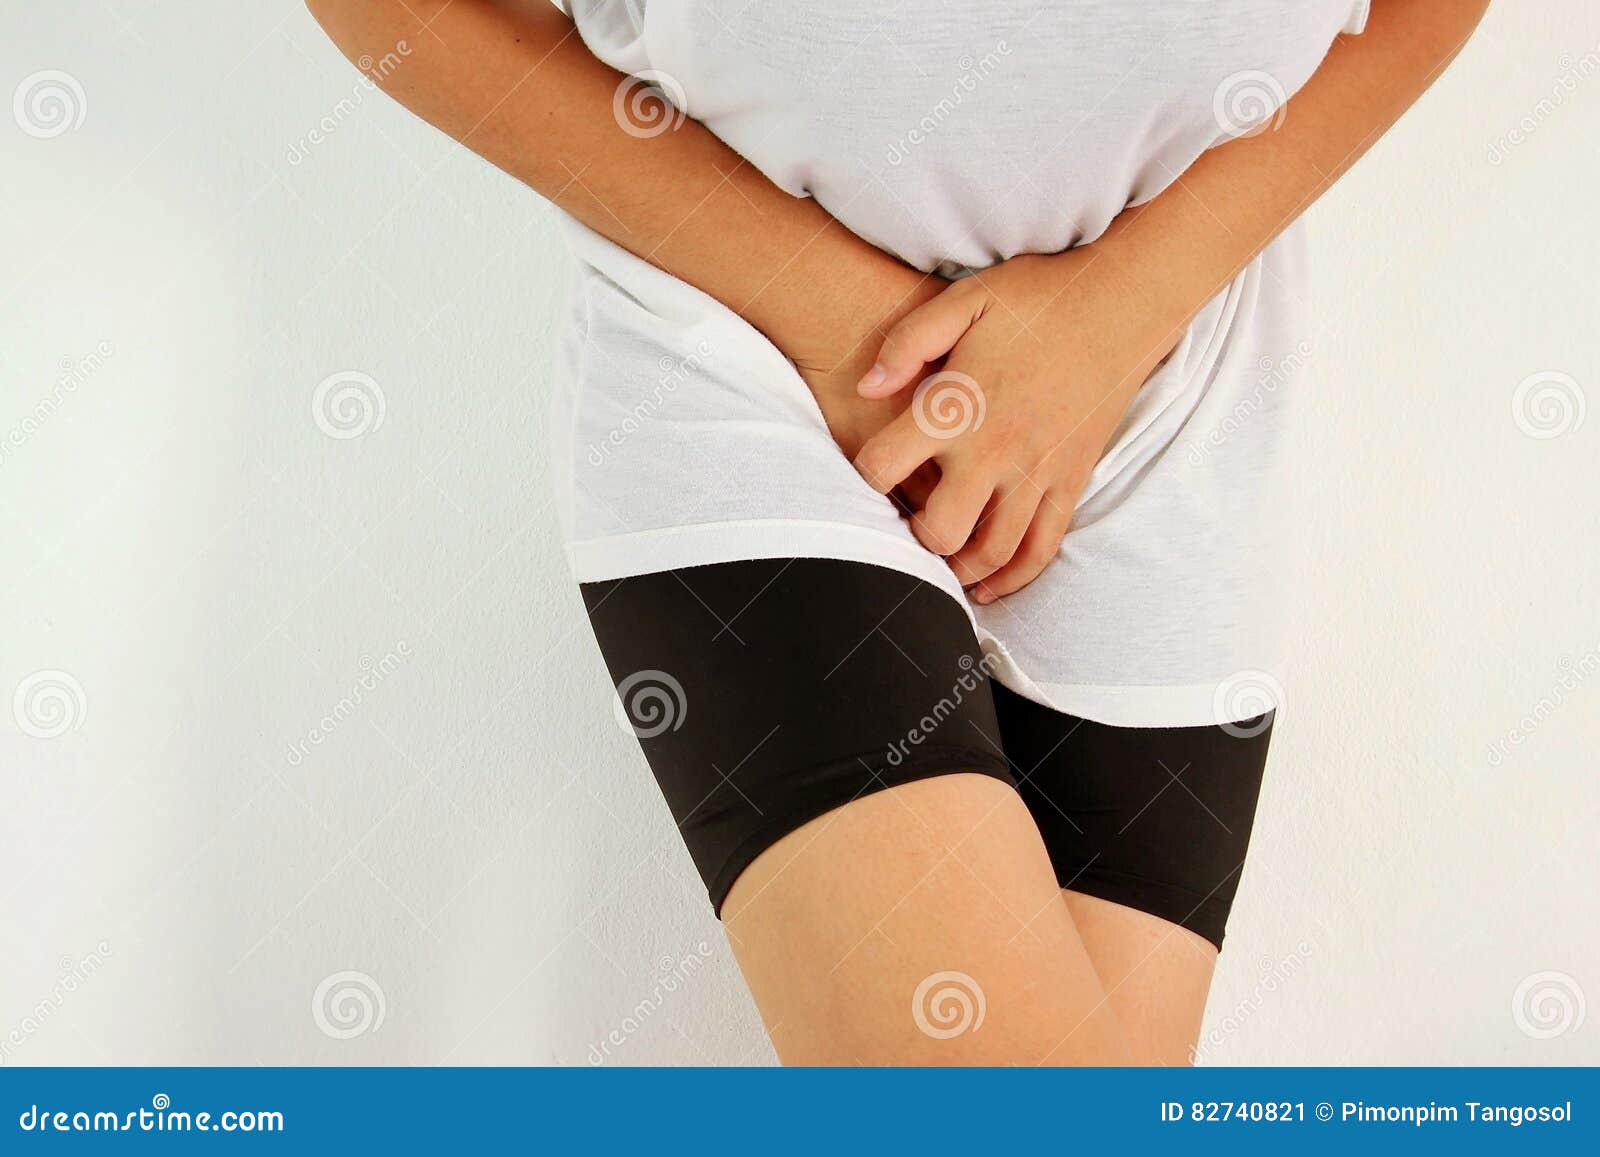 Woman with Hands Holding Her Crotch Stock Image - Image of lady